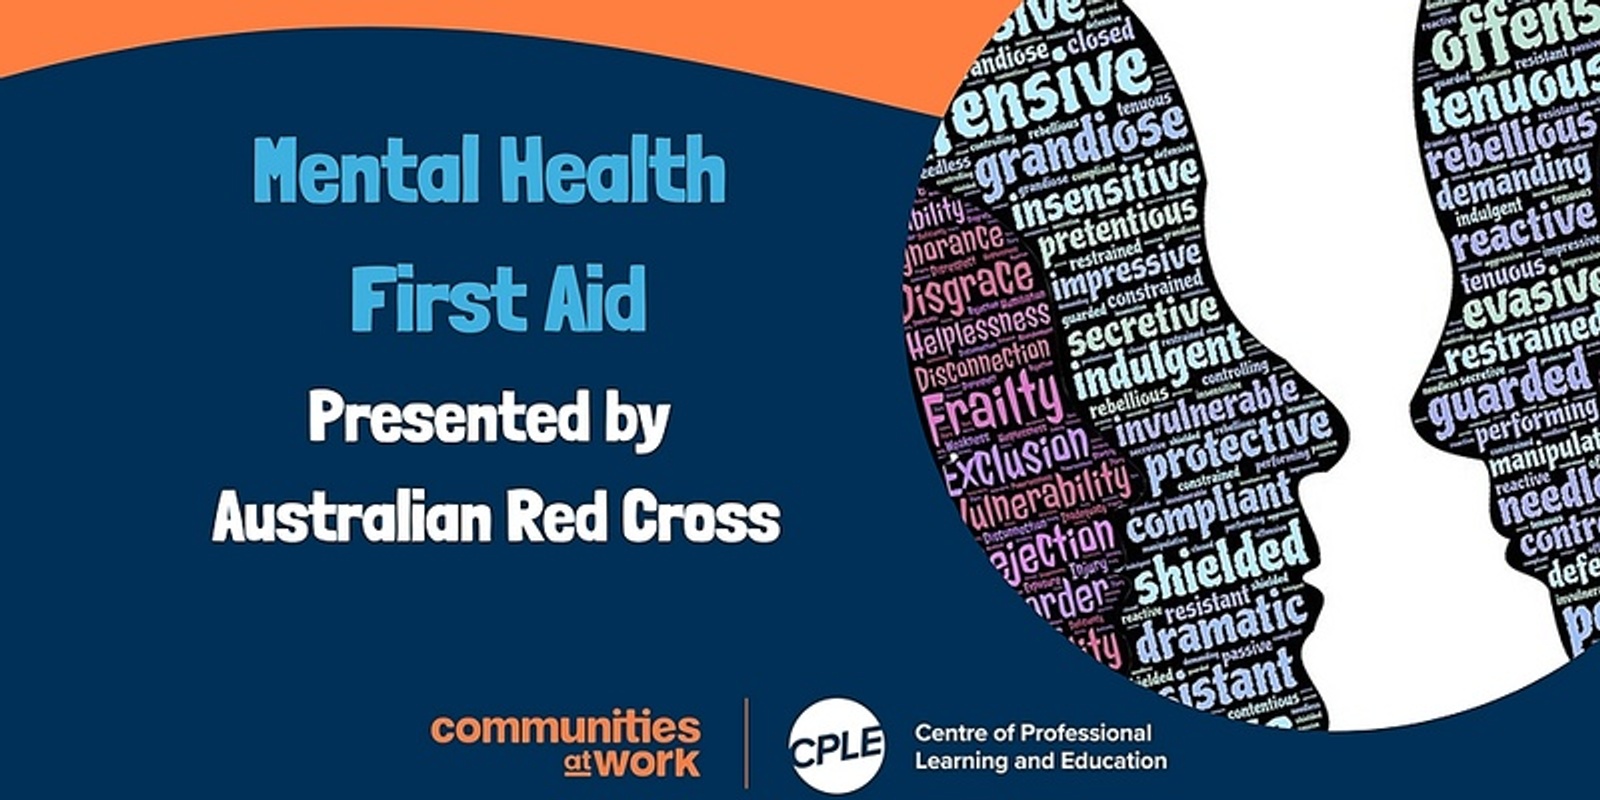 Mental Health First Aid with Australian Red Cross [2 day event]